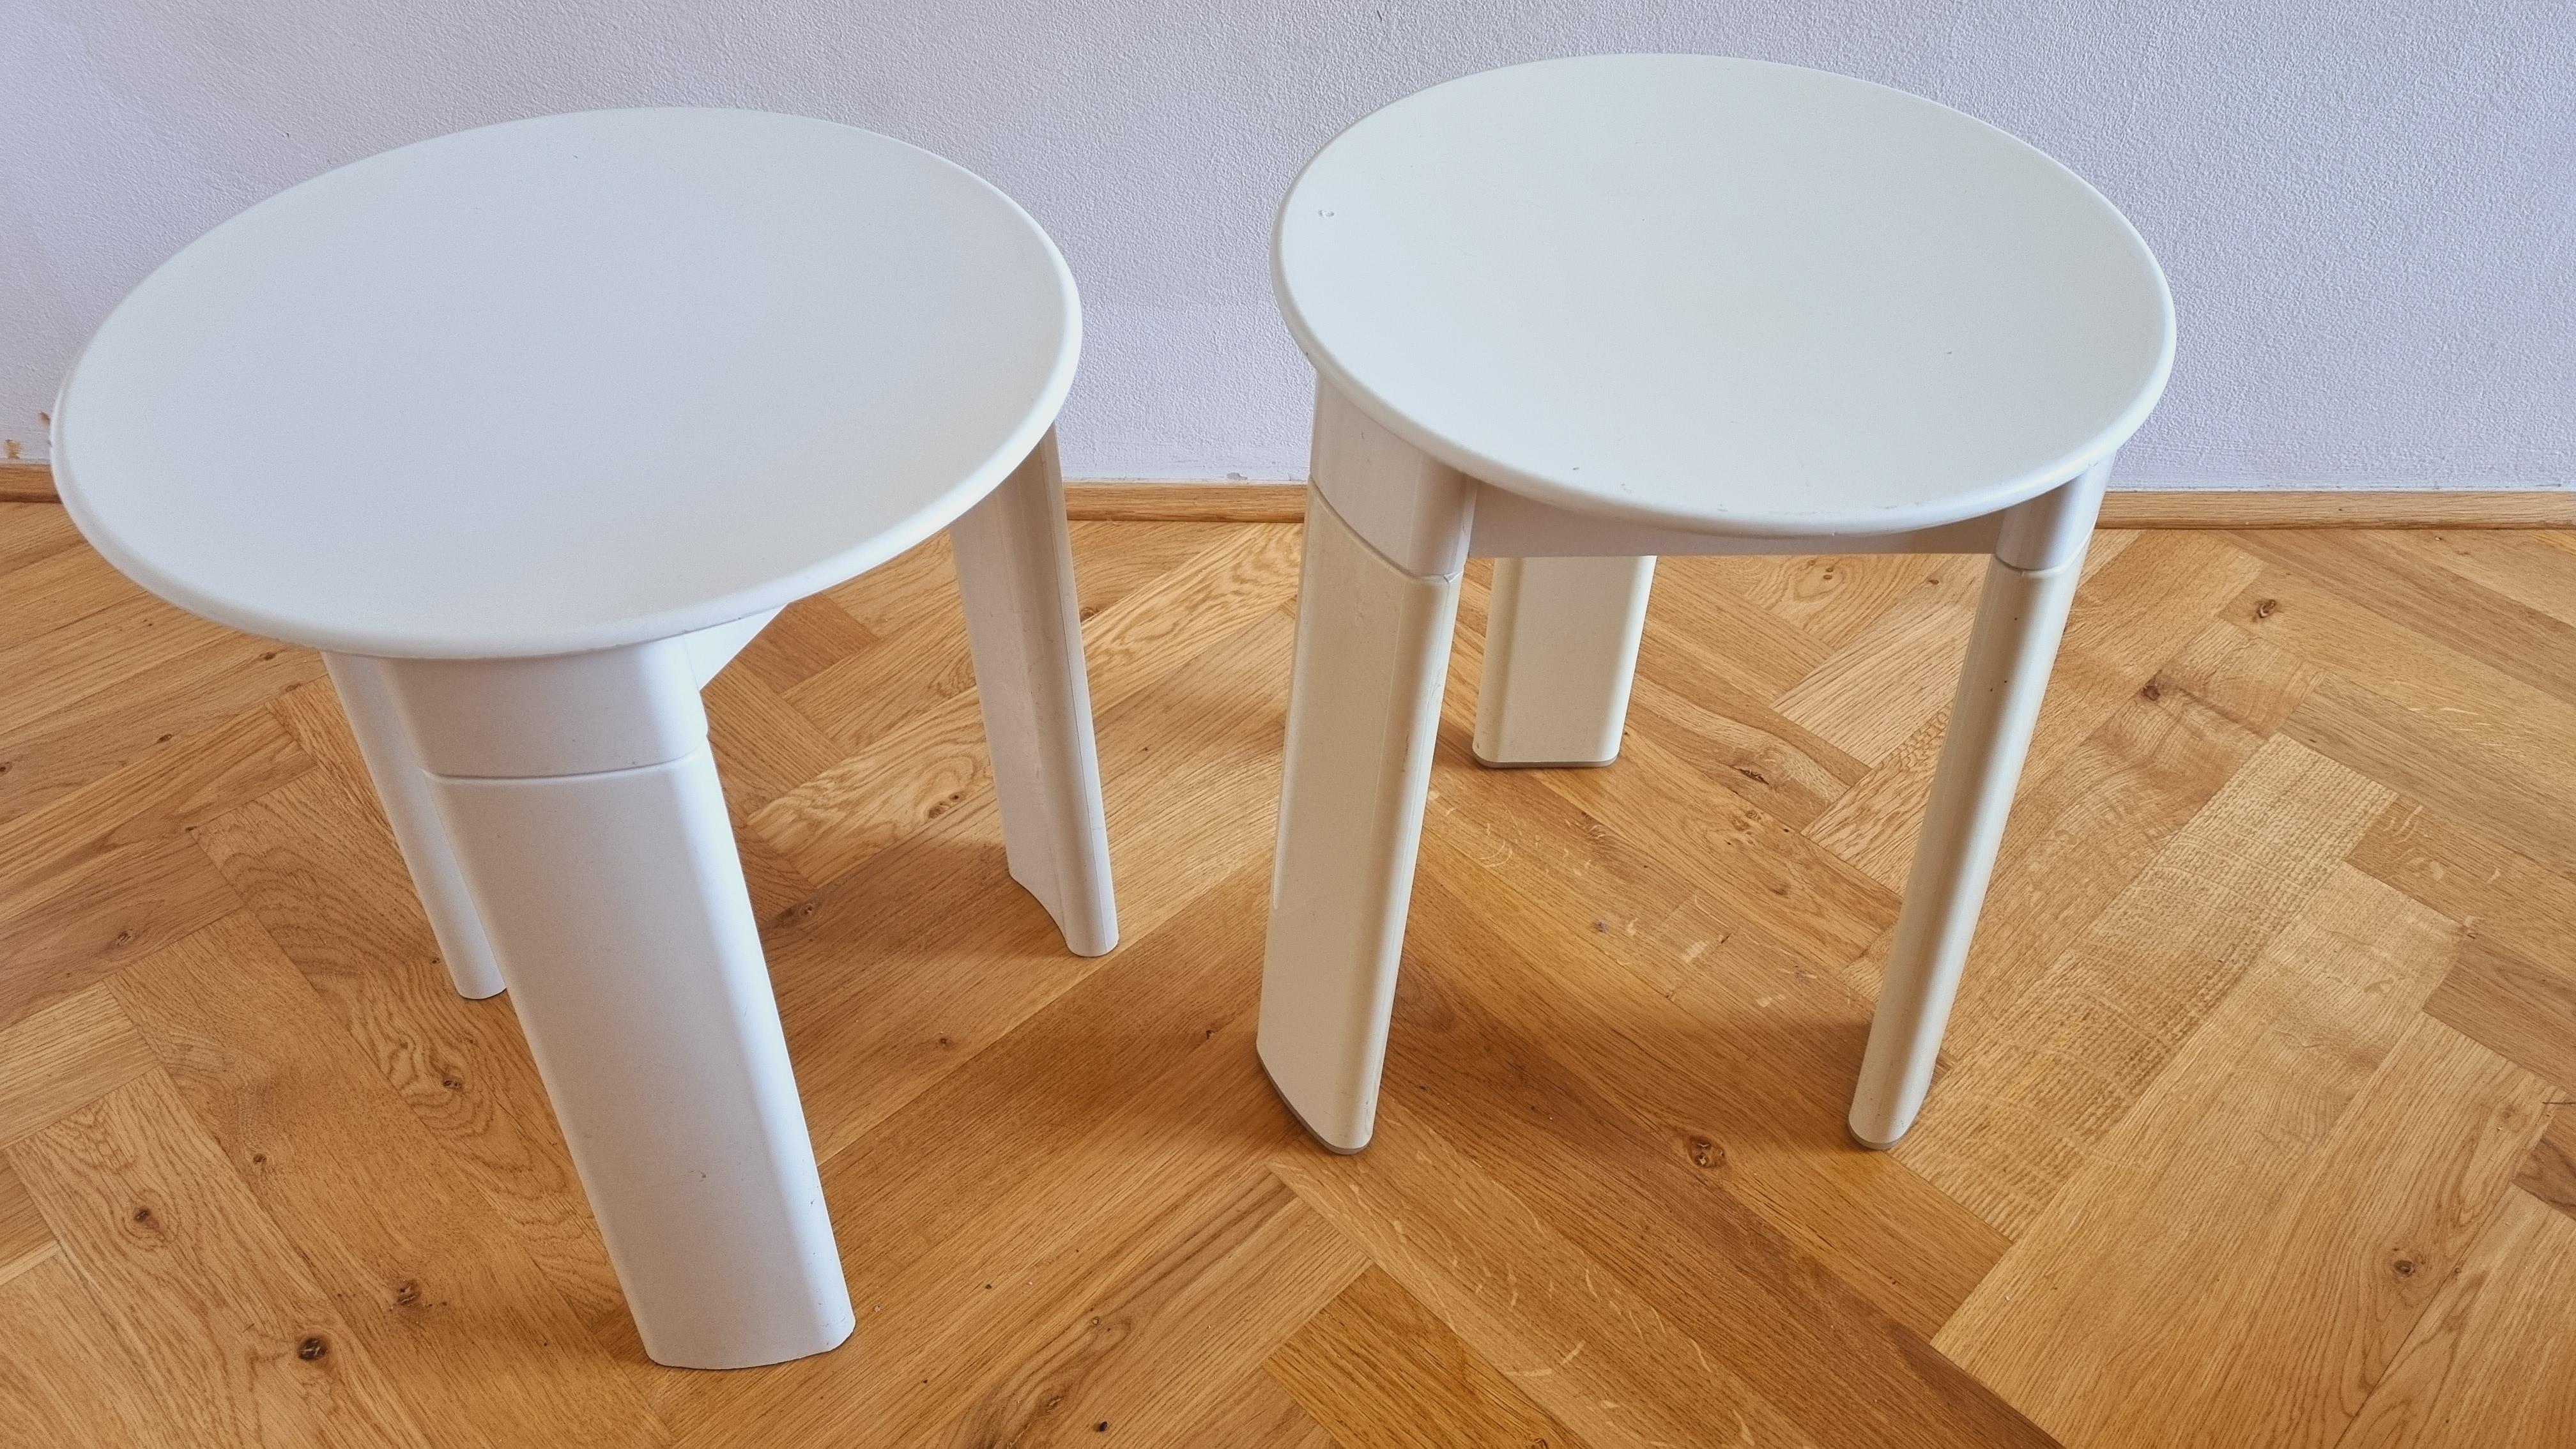 Plastic Pair of Midcentury Stools or Side Tables Trio, Olaf Von Bohr, Gedy, Italy, 1970s For Sale